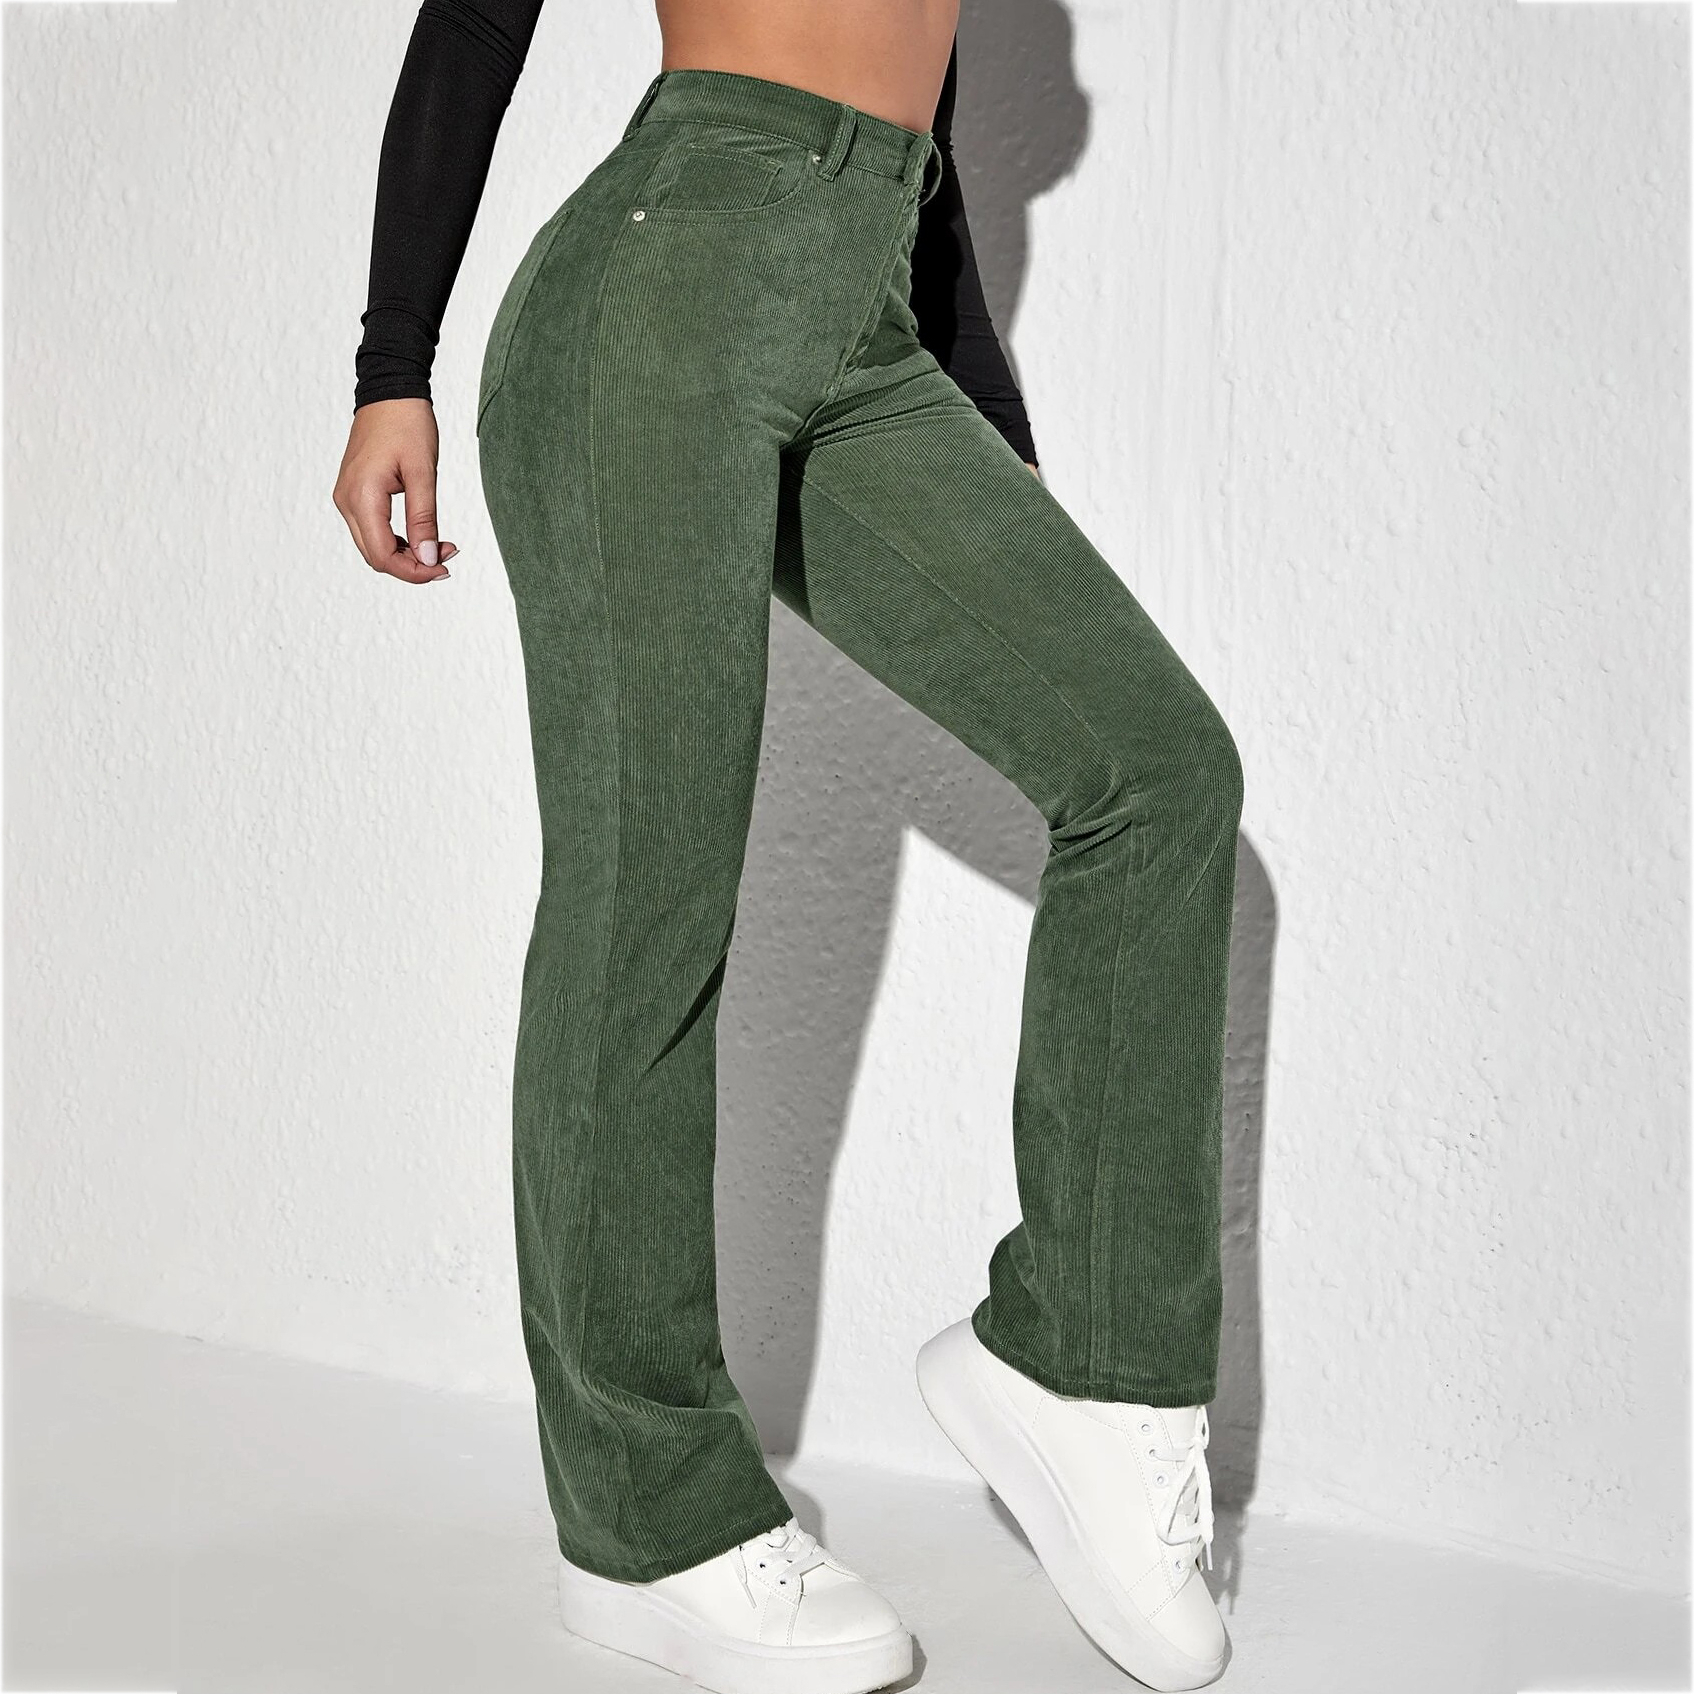 Letter Patched Flare Leg Corduroy Pants - Green, M